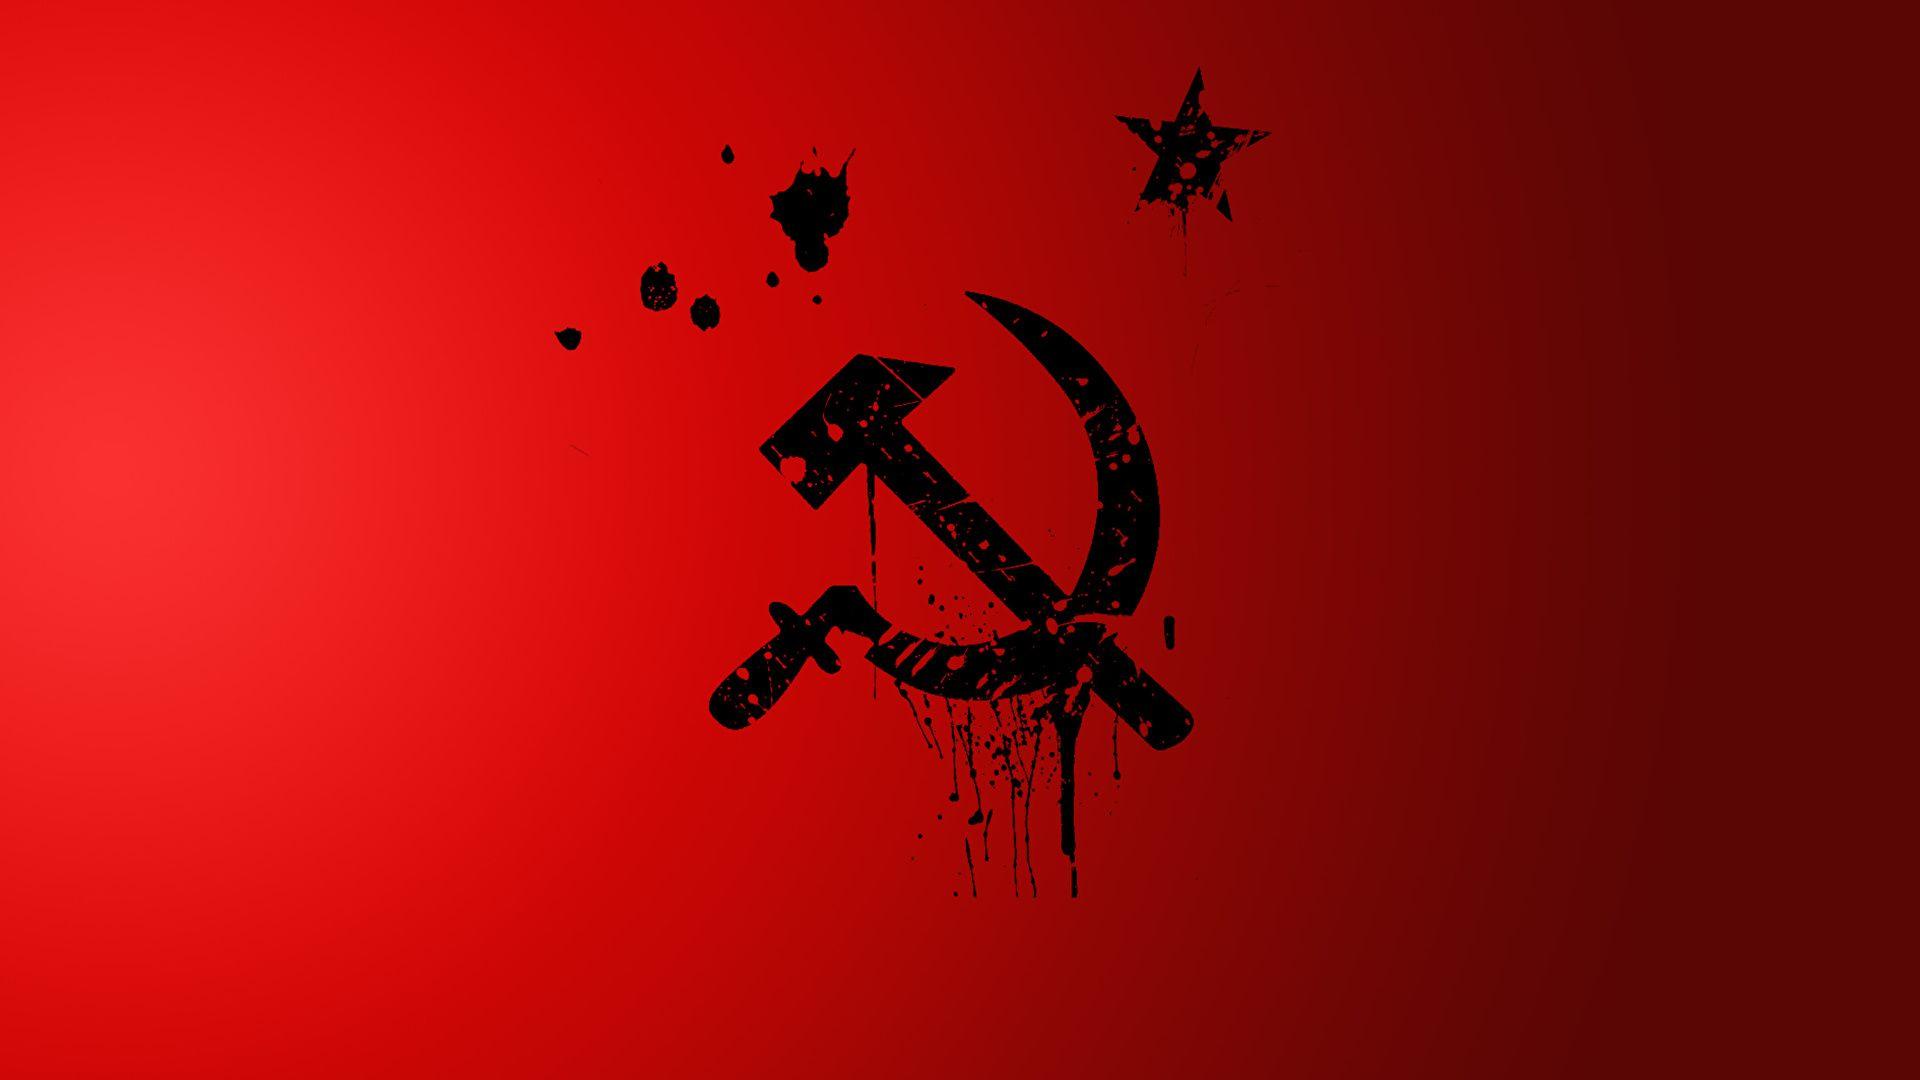 Image Hammer and sickle 1920x1080